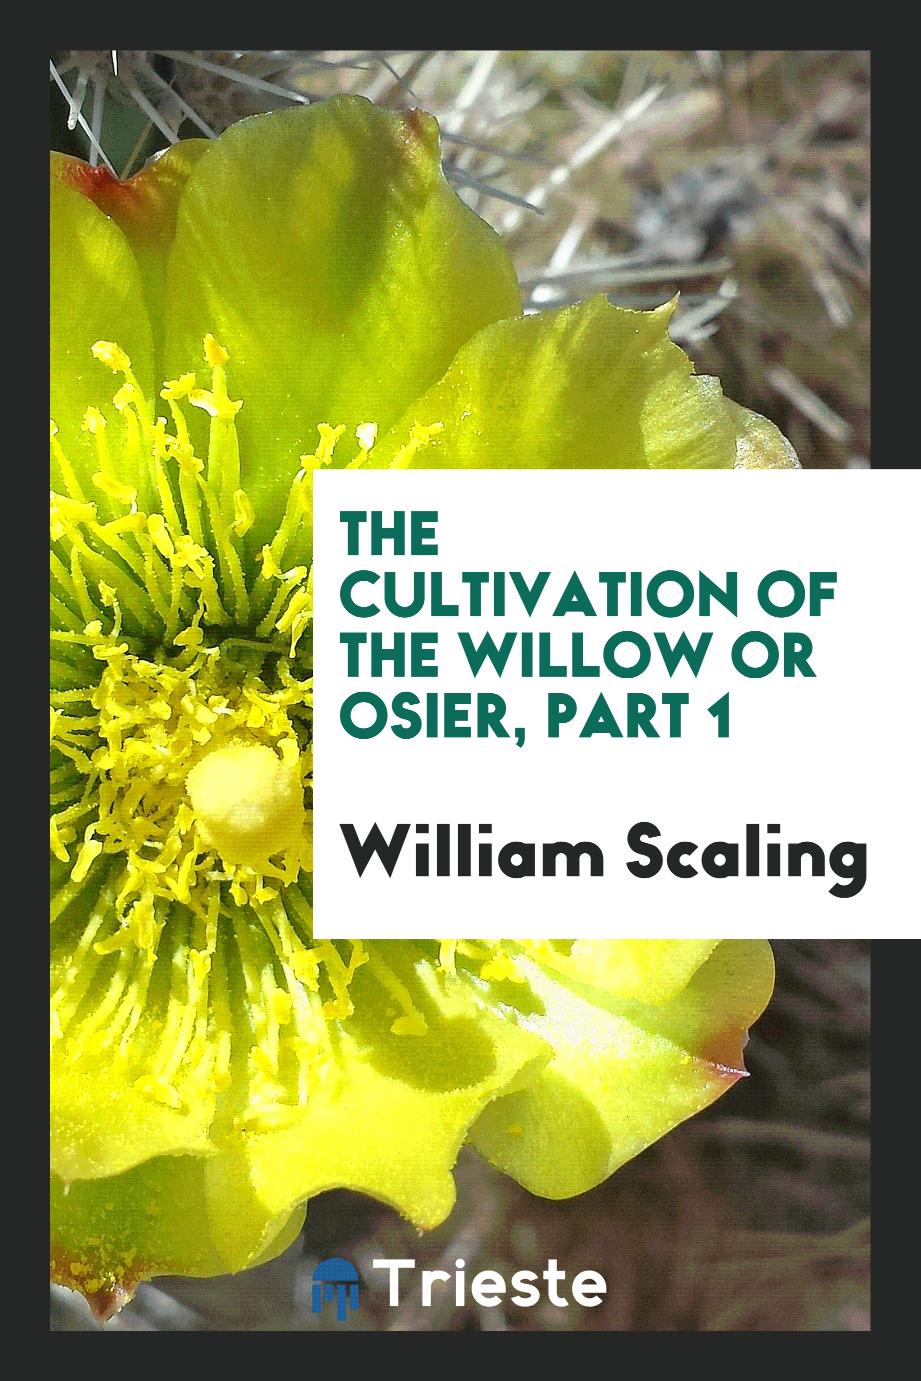 The cultivation of the willow or osier, Part 1